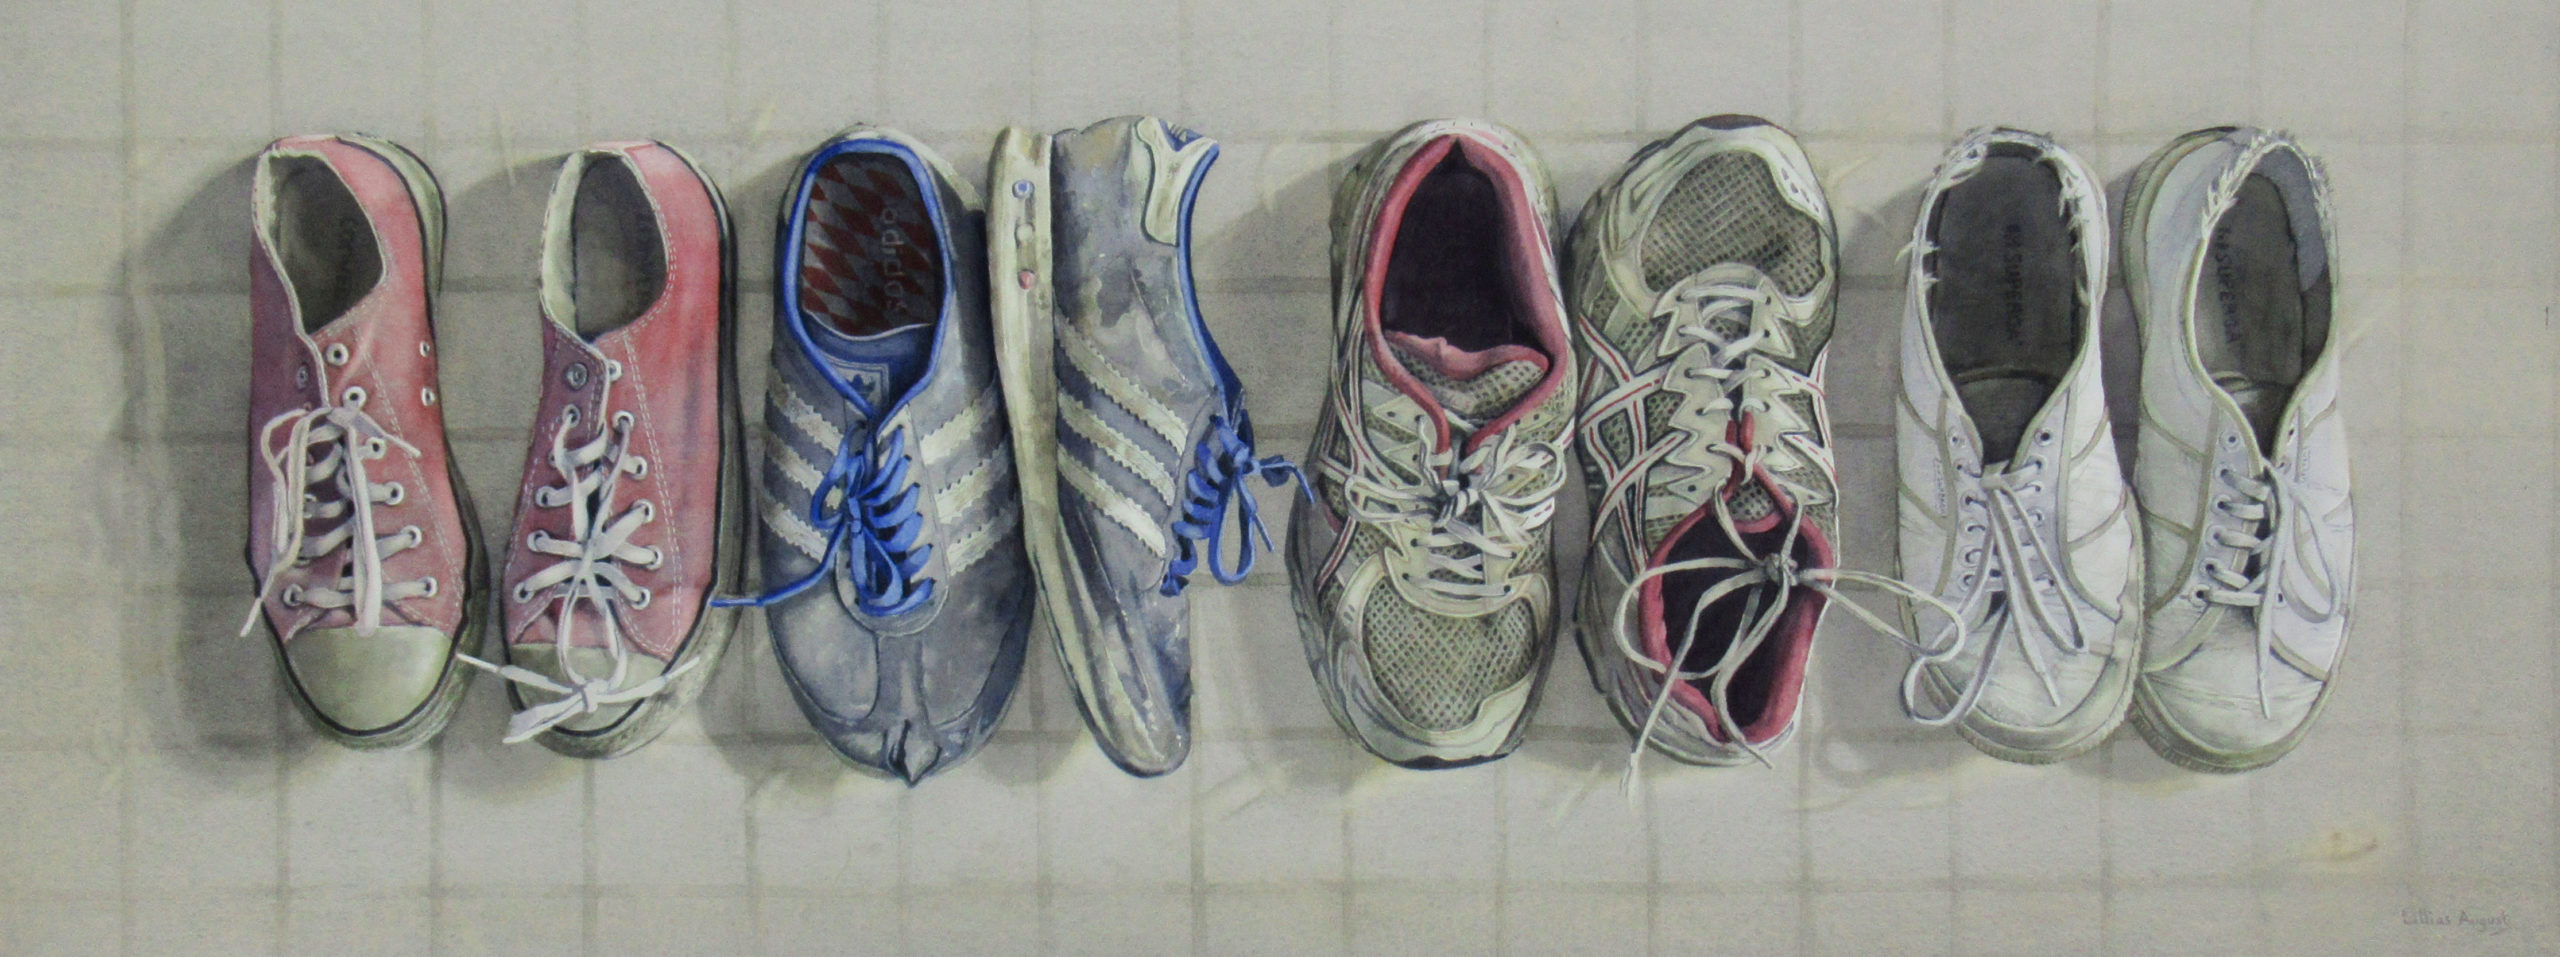 Old trainers 37 x 96cm